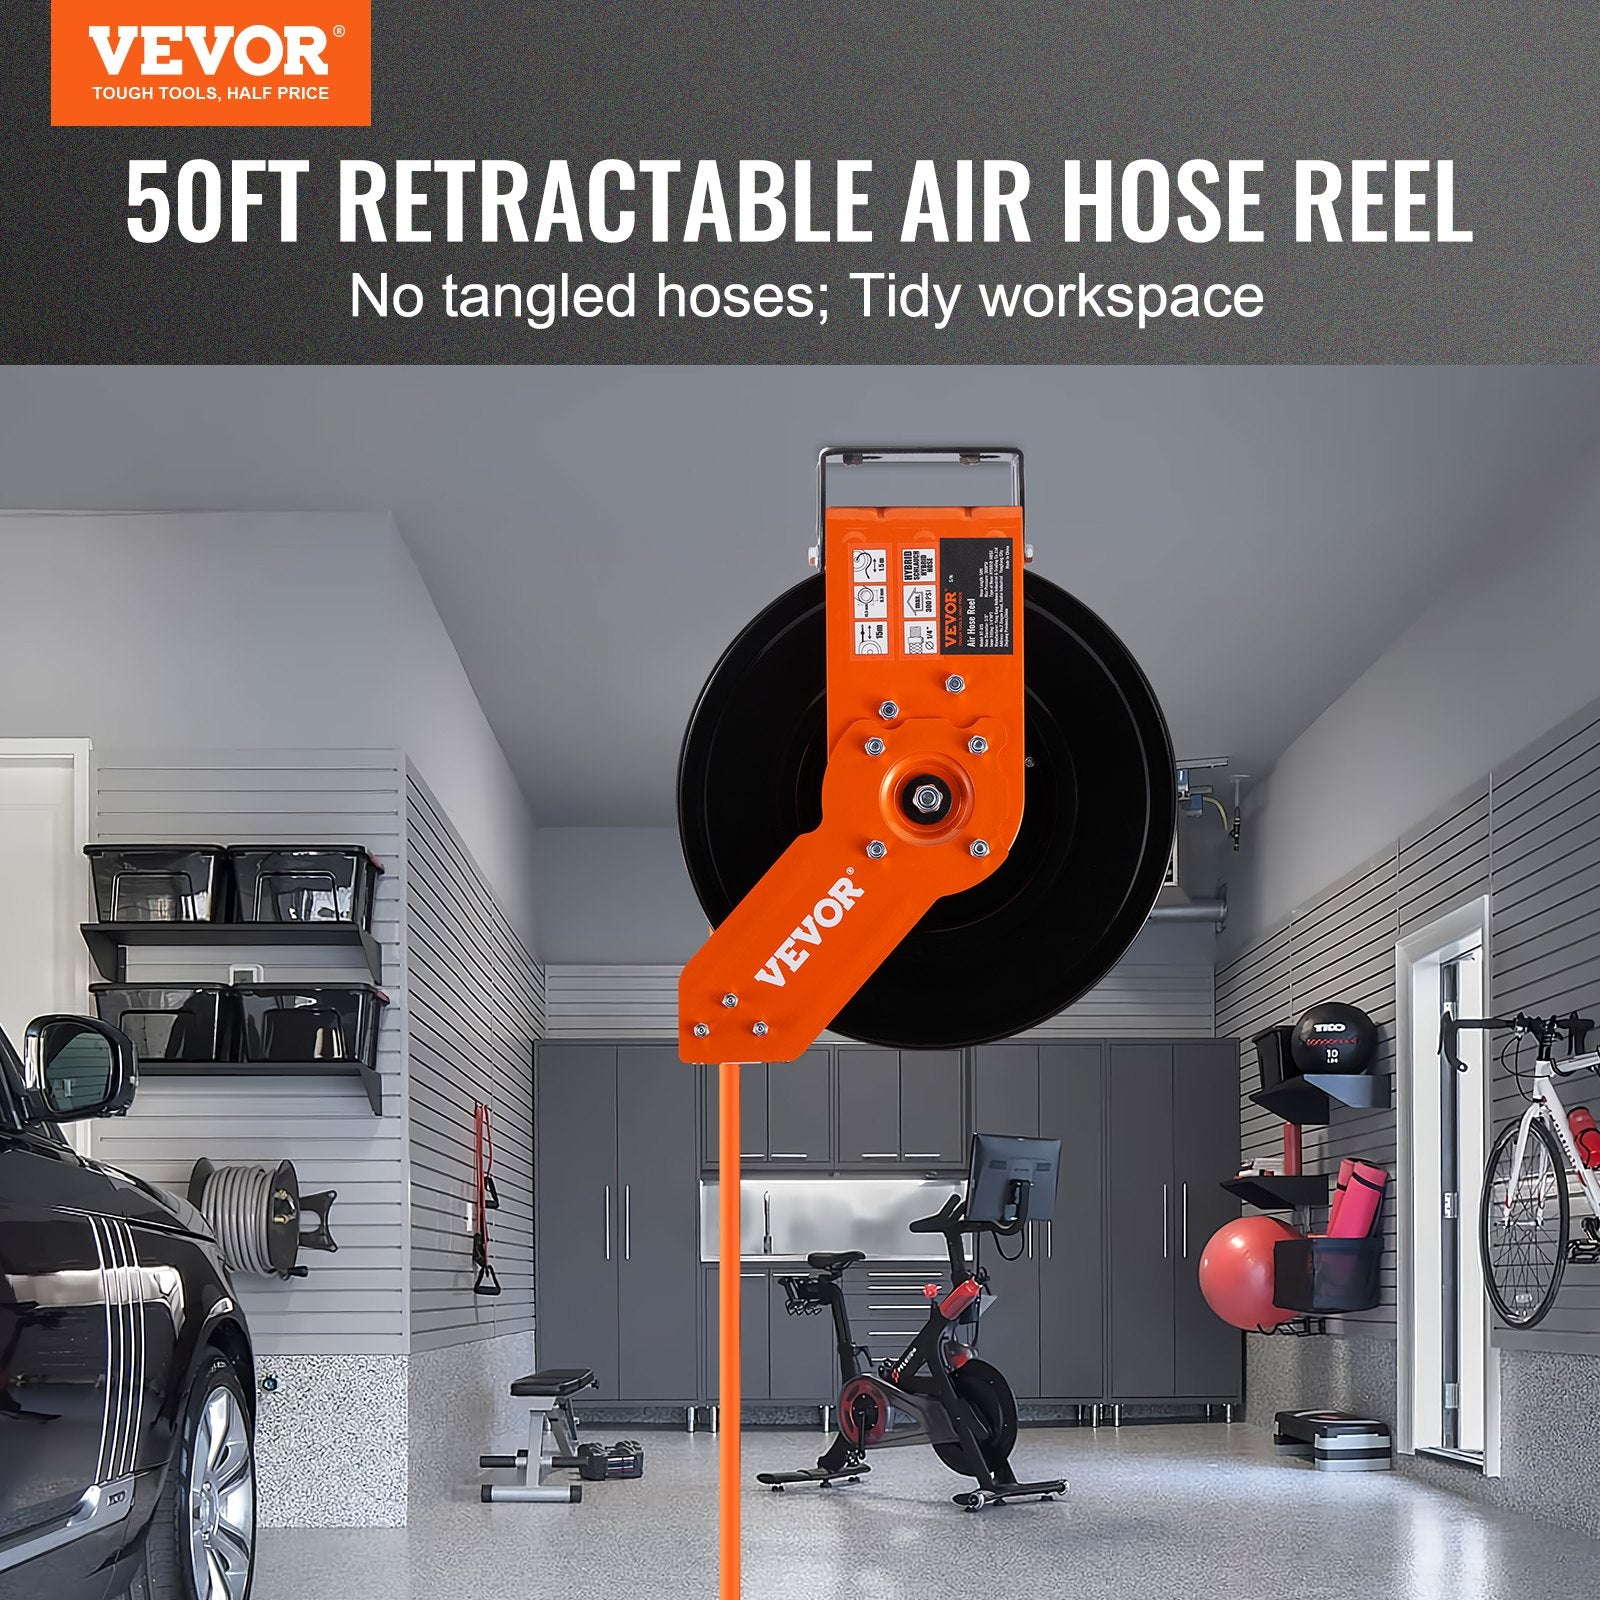 Vevor Retractable Air Hose Reel, 3/8in x 50 Ft Hybrid Air Hose Max 300PS, 5 ft lead in, Ceiling/Wall Mount Heavy Duty Double Arm Steel Reel